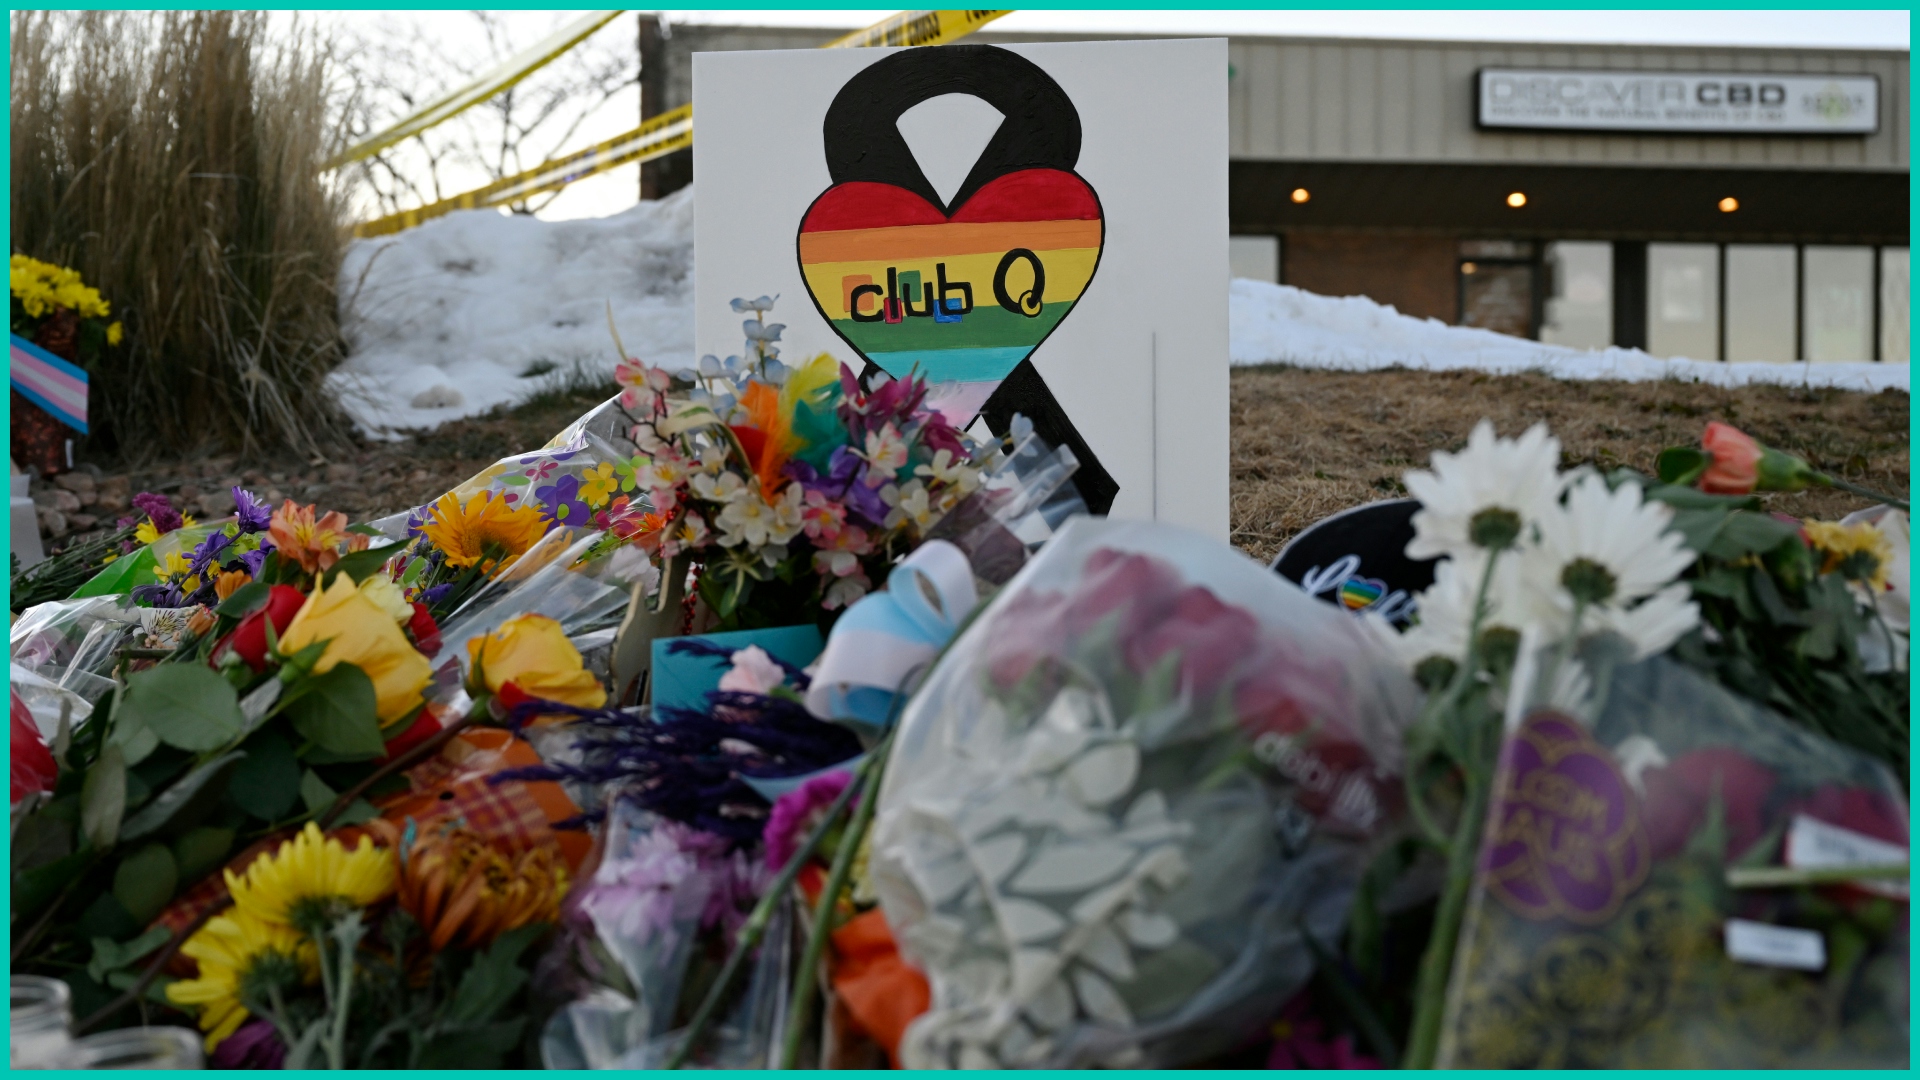 People leaves flowers and other items at a memorial near Club Q 